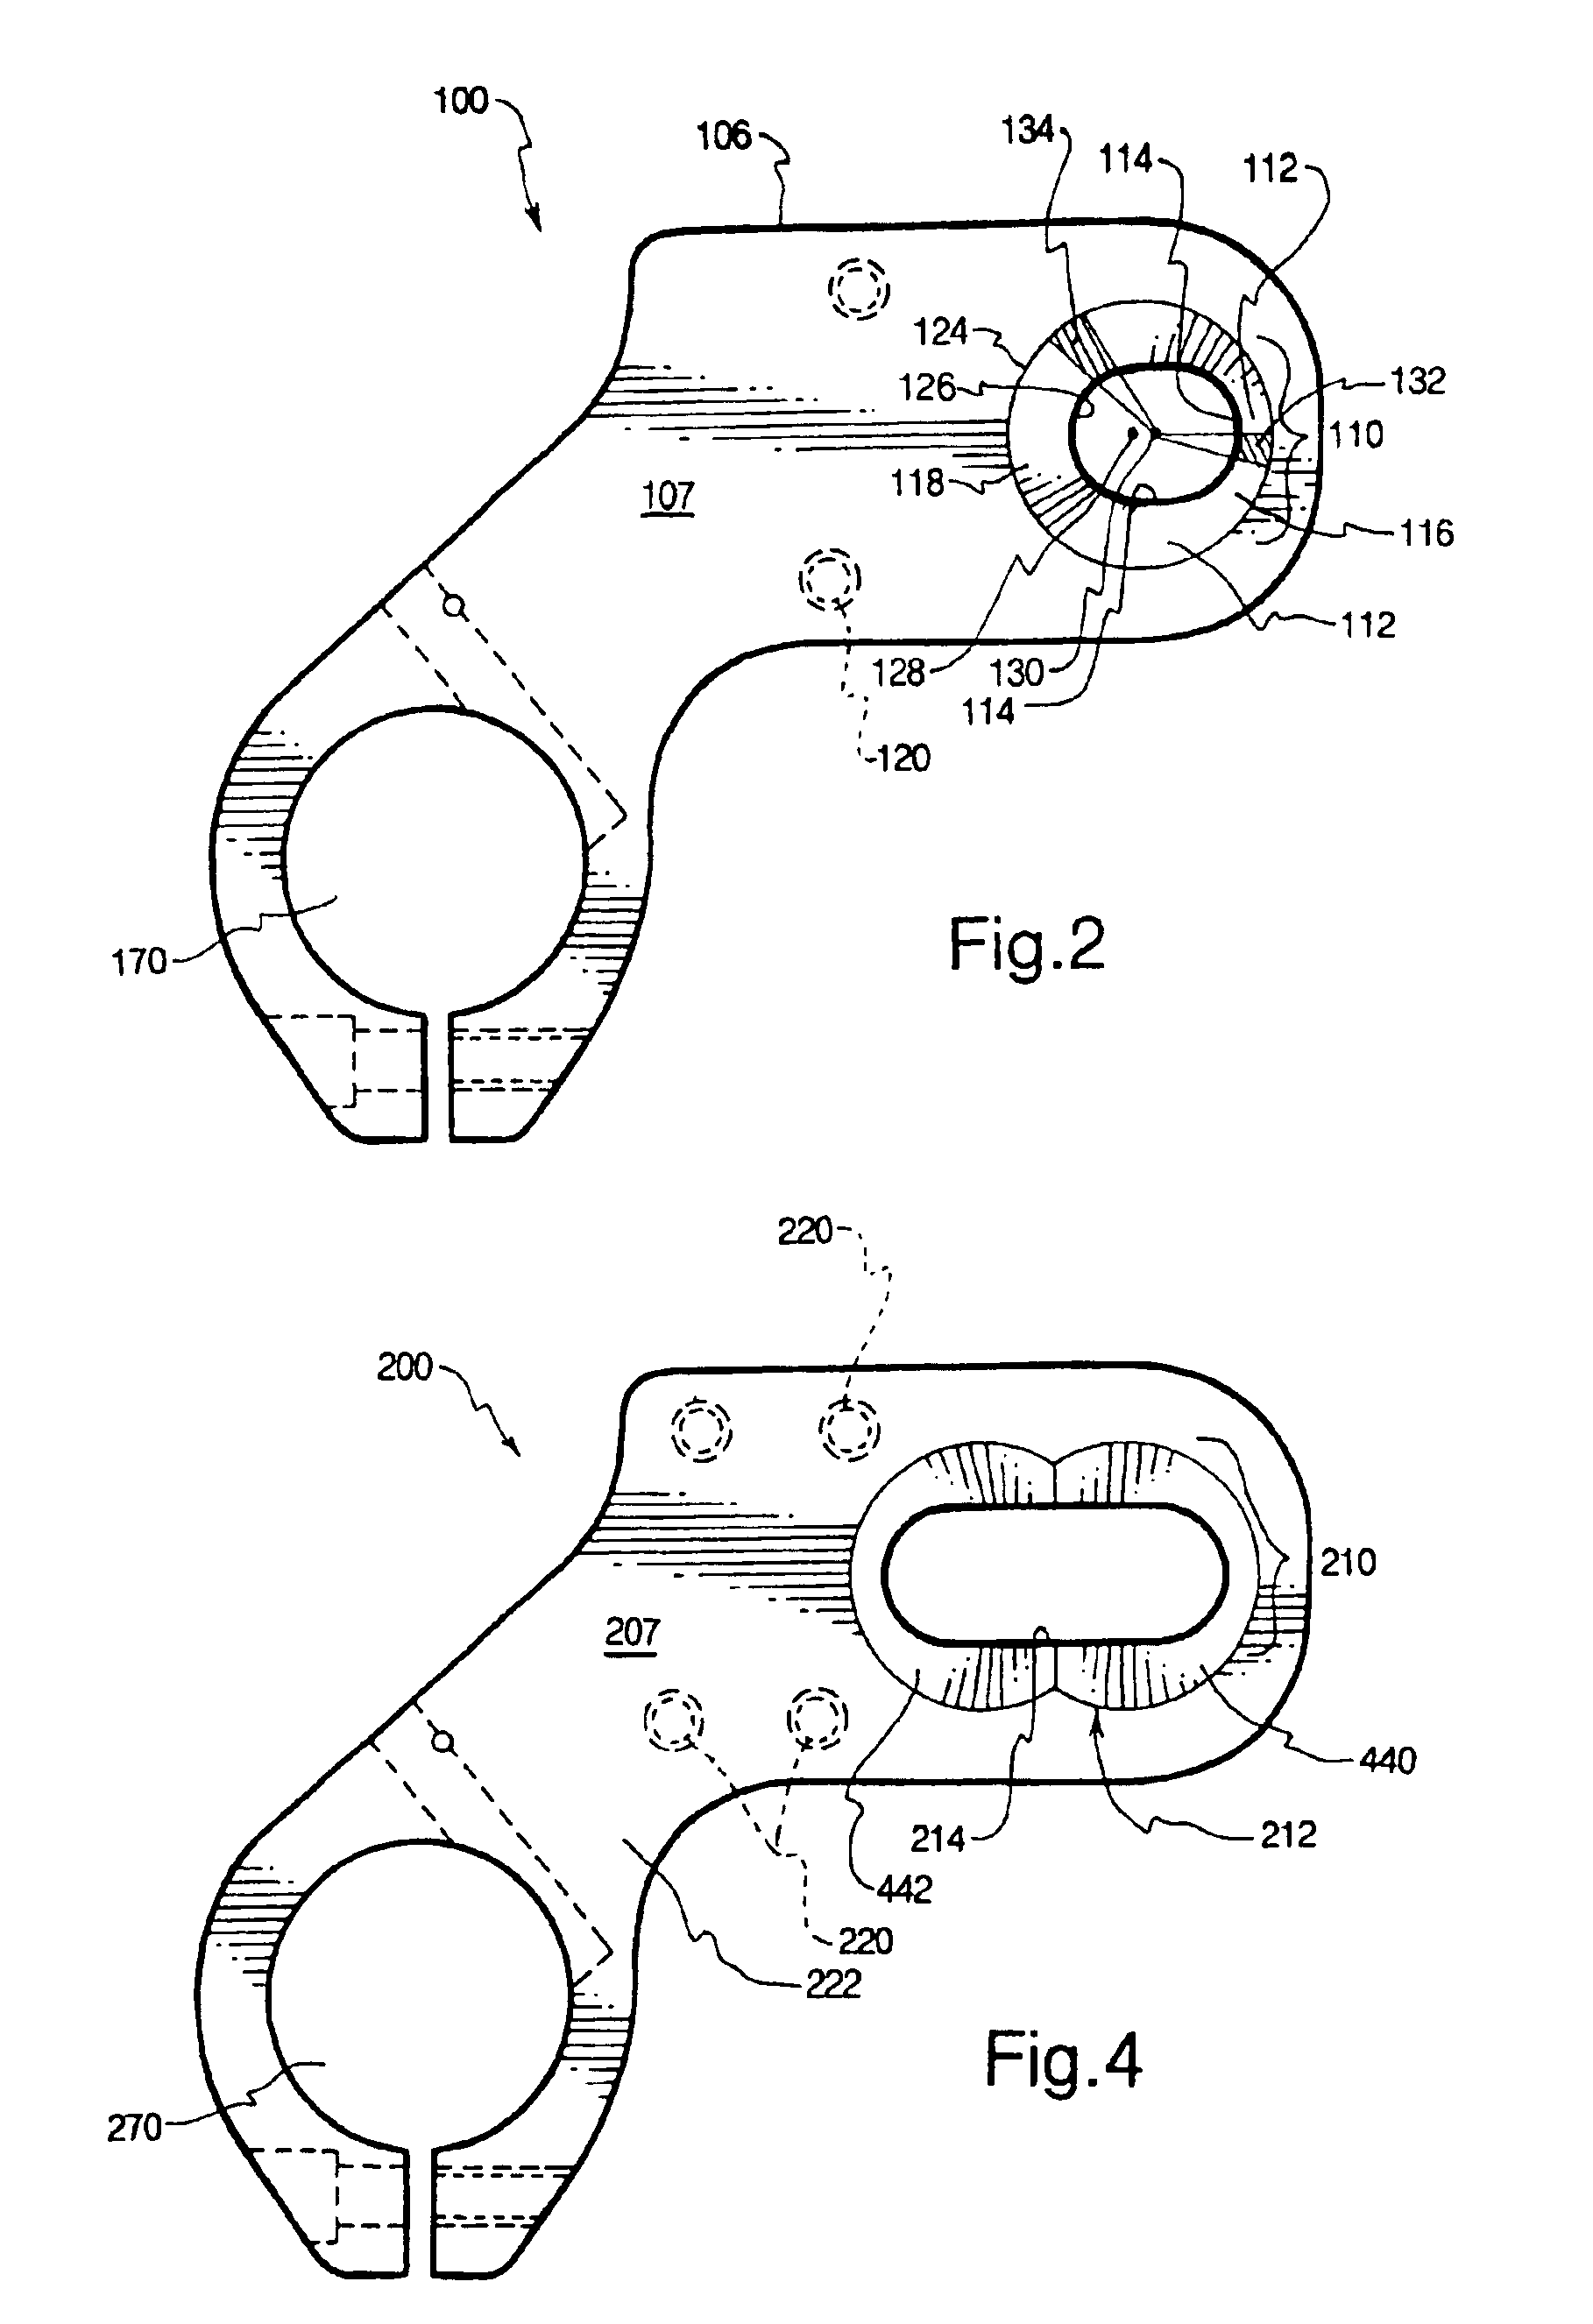 Archery bow accessory mounting system and method